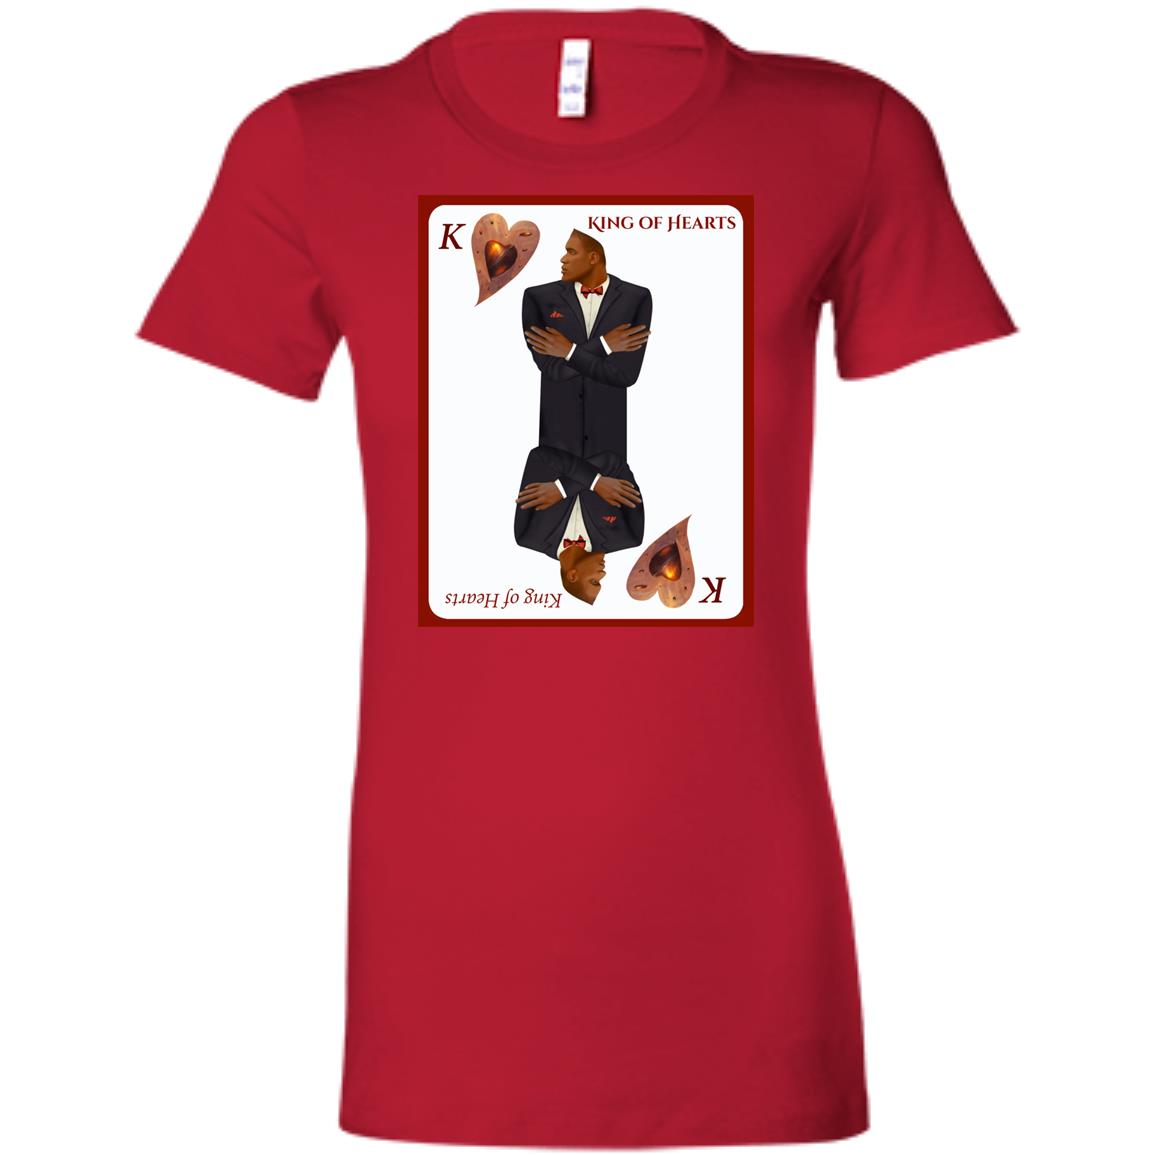 king of hearts - Women's Fitted T-Shirt